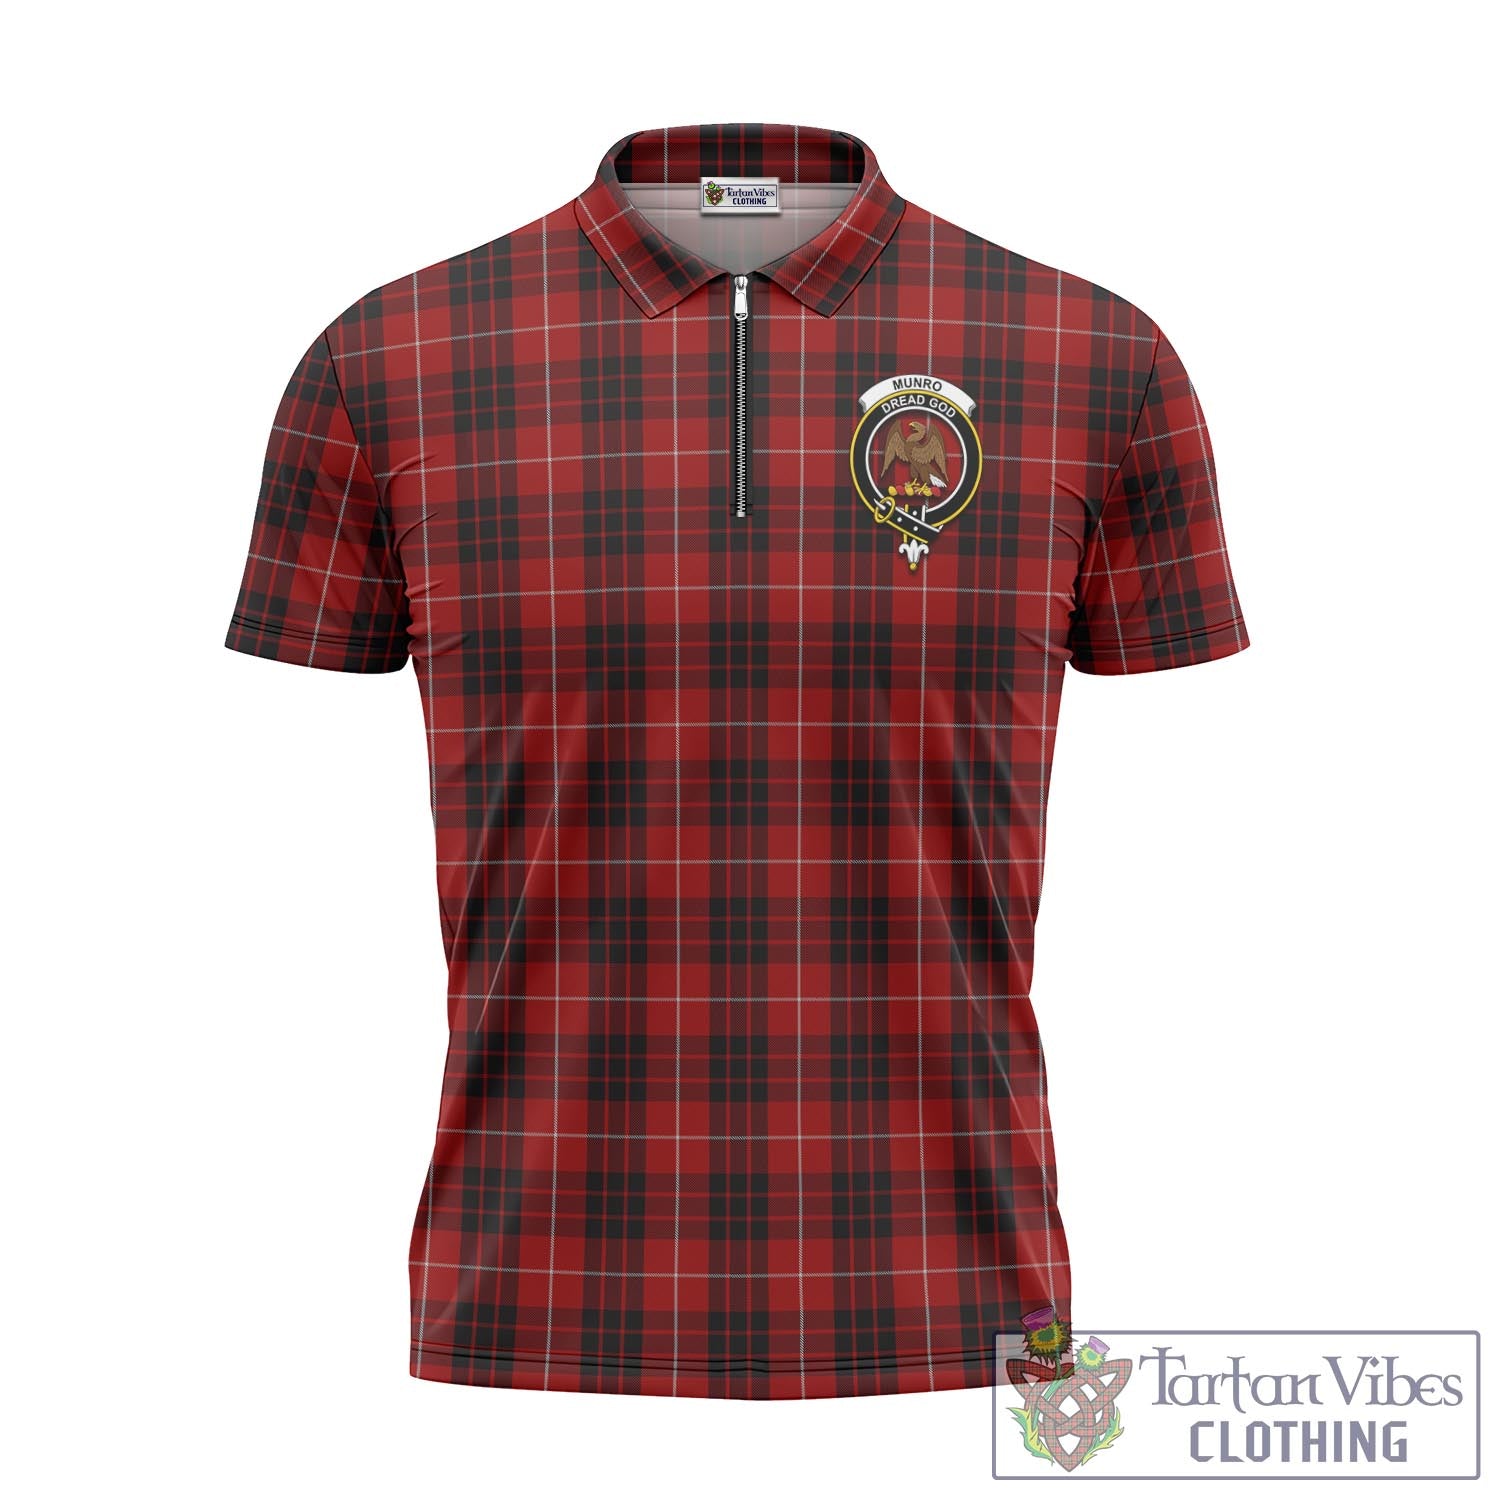 Tartan Vibes Clothing Munro Black and Red Tartan Zipper Polo Shirt with Family Crest